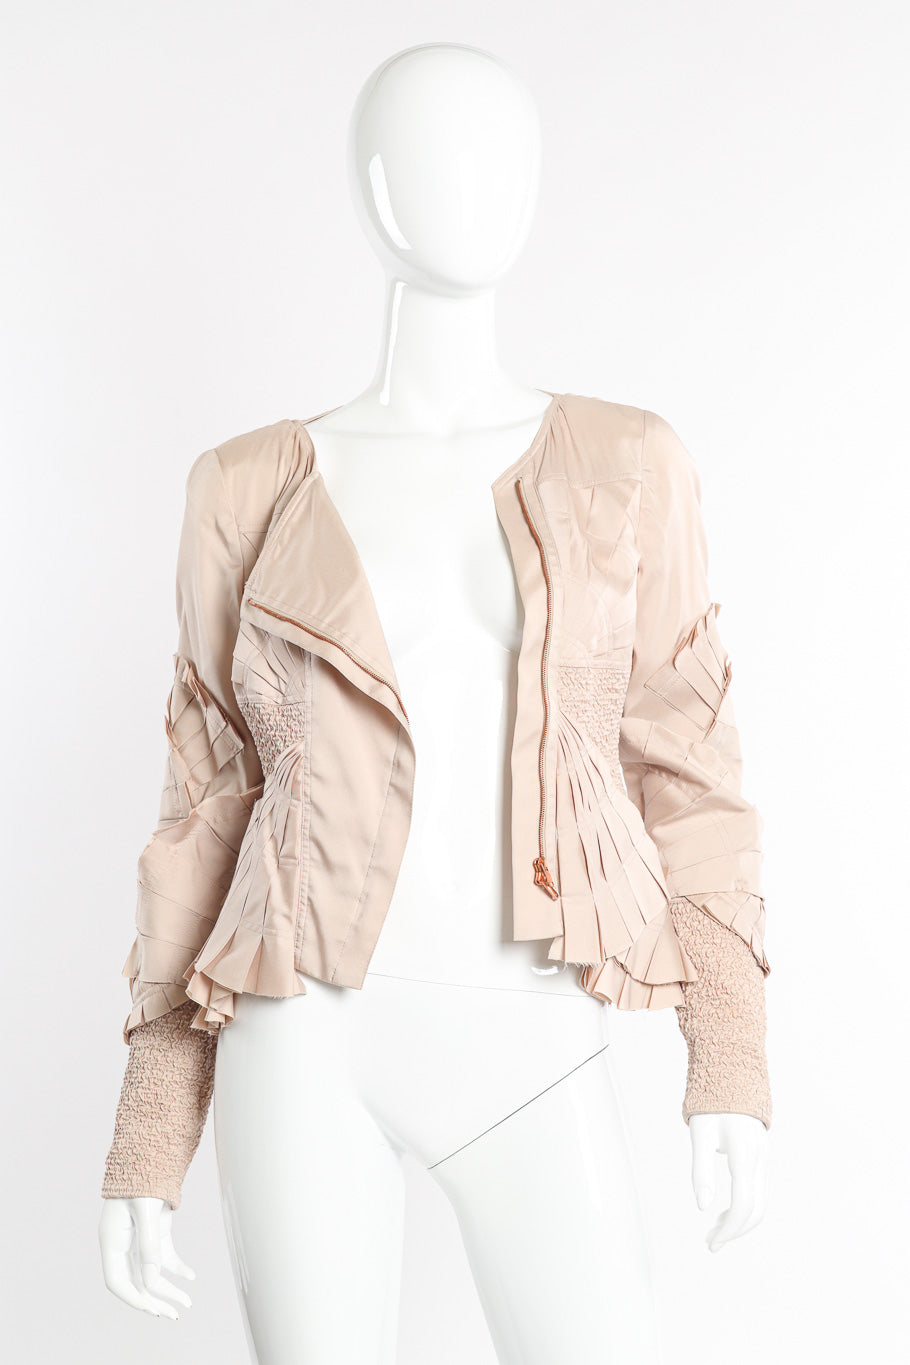 Silk jacket by Gucci on mannequin unzipped front @recessla